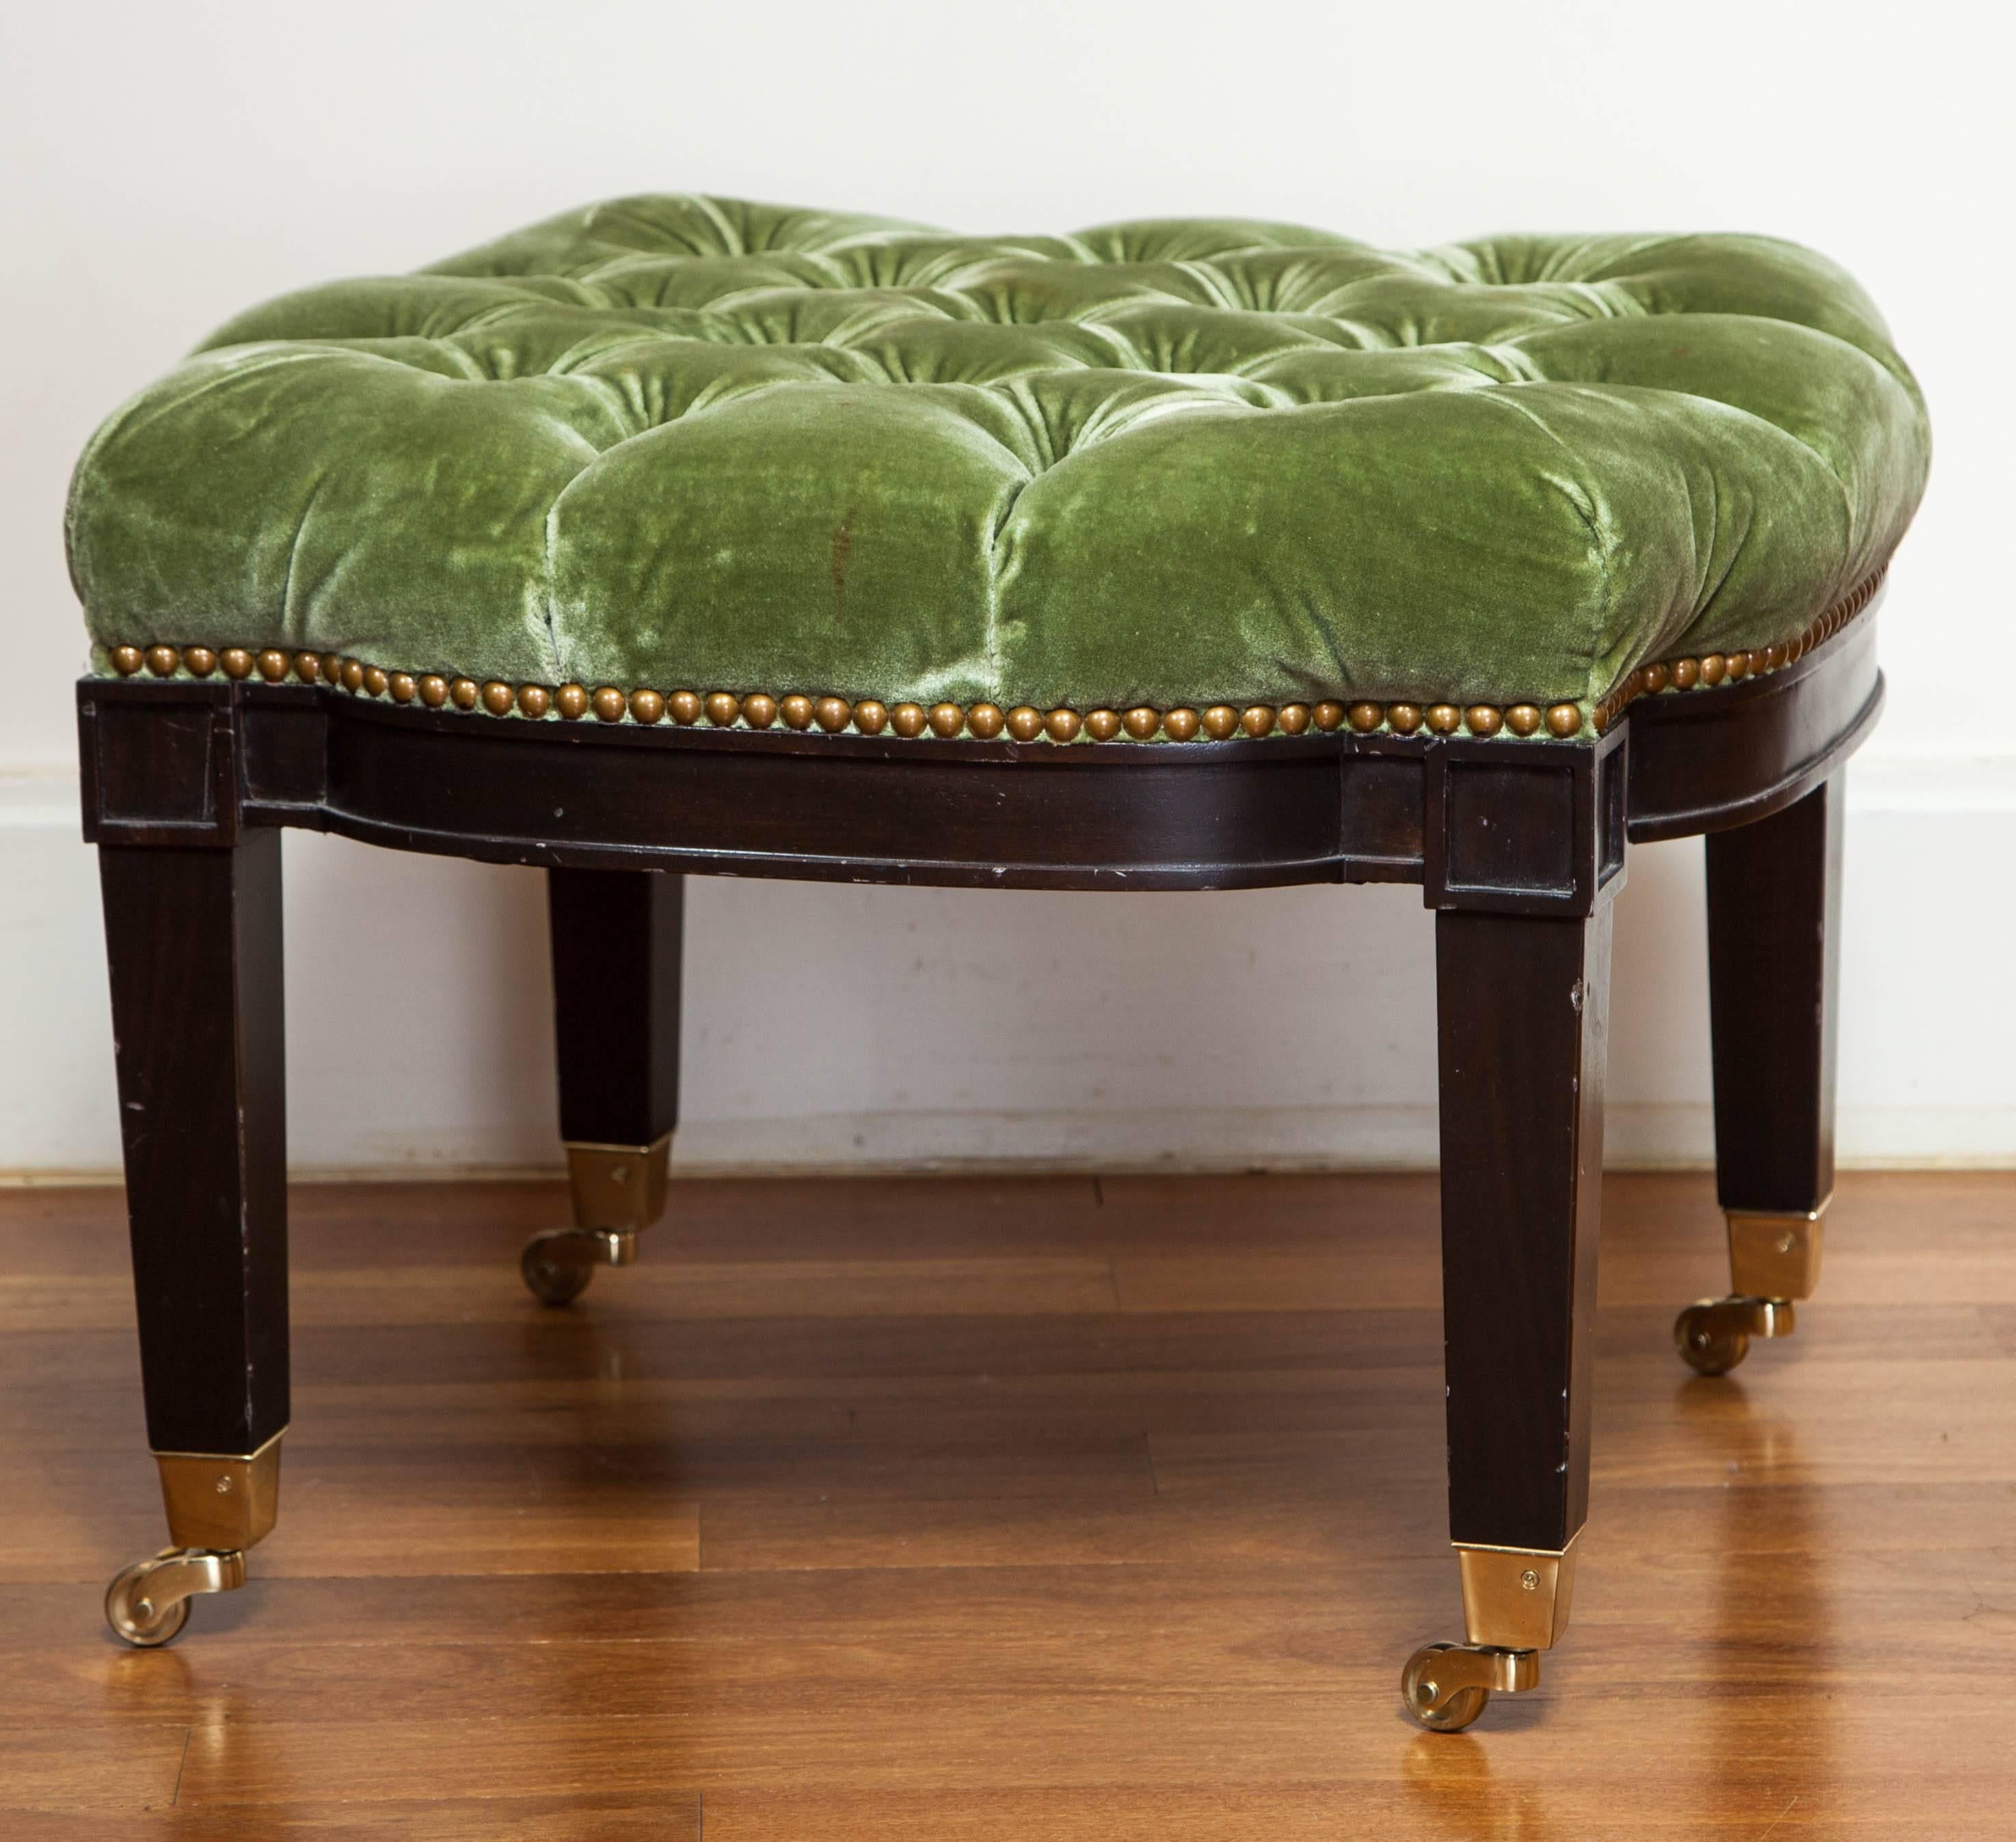 American Green Tufted Ottoman on Casters